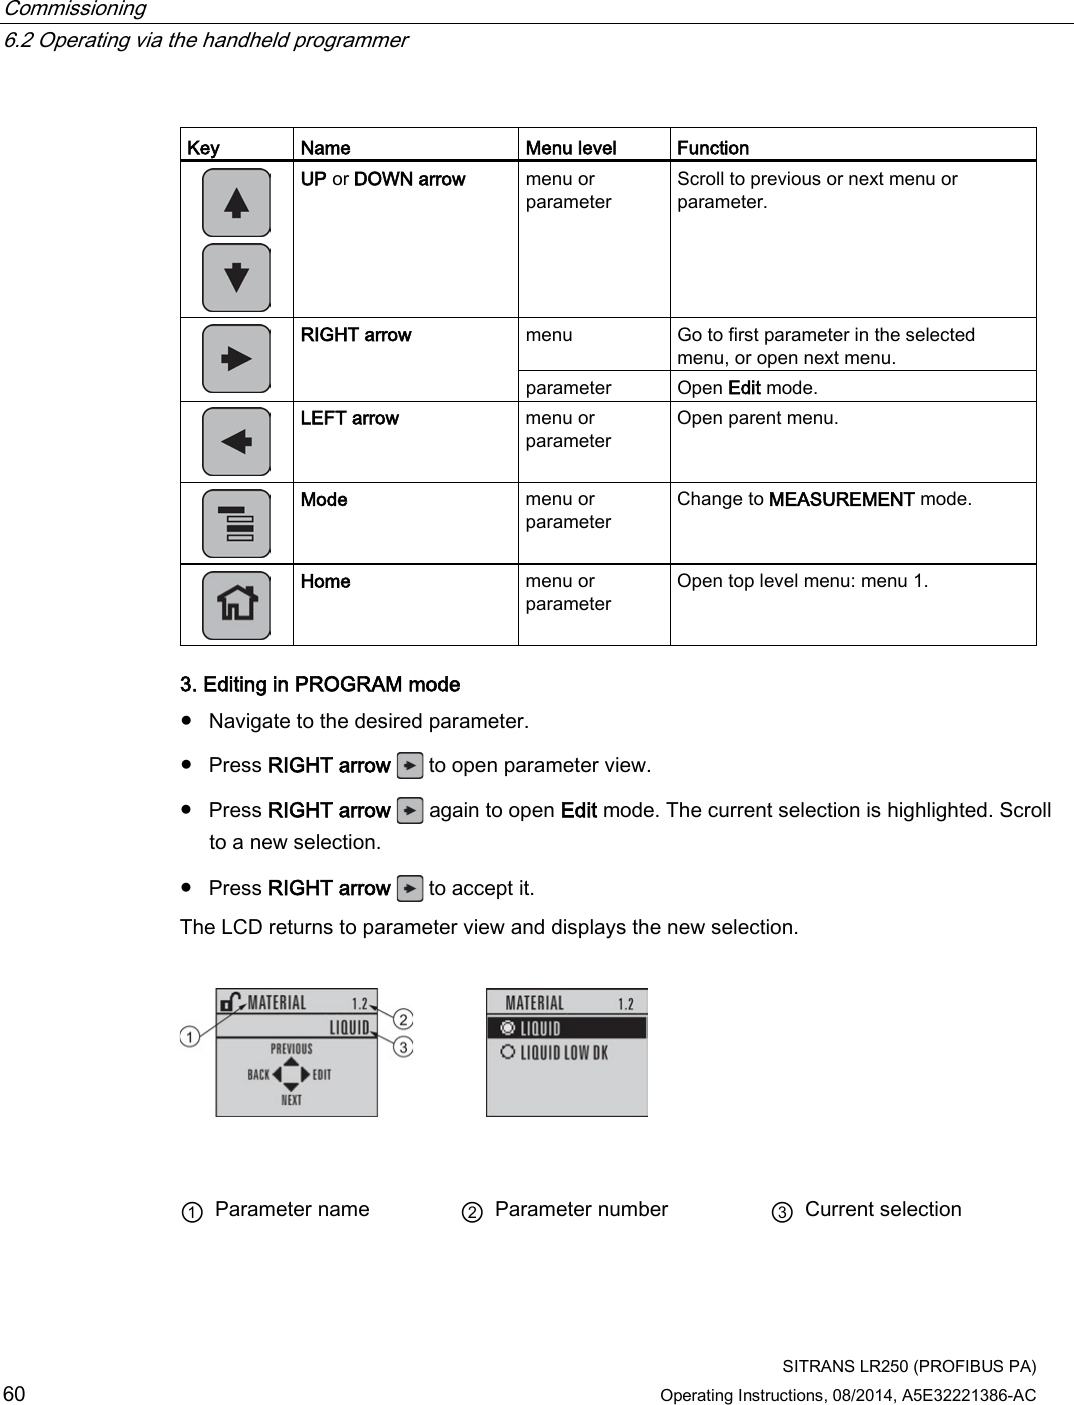 Commissioning   6.2 Operating via the handheld programmer  SITRANS LR250 (PROFIBUS PA) 60 Operating Instructions, 08/2014, A5E32221386-AC  Key Name Menu level Function   UP or DOWN arrow  menu or parameter Scroll to previous or next menu or parameter.  RIGHT arrow menu Go to first parameter in the selected menu, or open next menu. parameter Open Edit mode.  LEFT arrow menu or parameter Open parent menu.  Mode menu or parameter Change to MEASUREMENT mode.  Home menu or parameter Open top level menu: menu 1. 3. Editing in PROGRAM mode ● Navigate to the desired parameter. ● Press RIGHT arrow  to open parameter view. ● Press RIGHT arrow   again to open Edit mode. The current selection is highlighted. Scroll to a new selection. ● Press RIGHT arrow  to accept it. The LCD returns to parameter view and displays the new selection.      ① Parameter name ② Parameter number ③ Current selection 